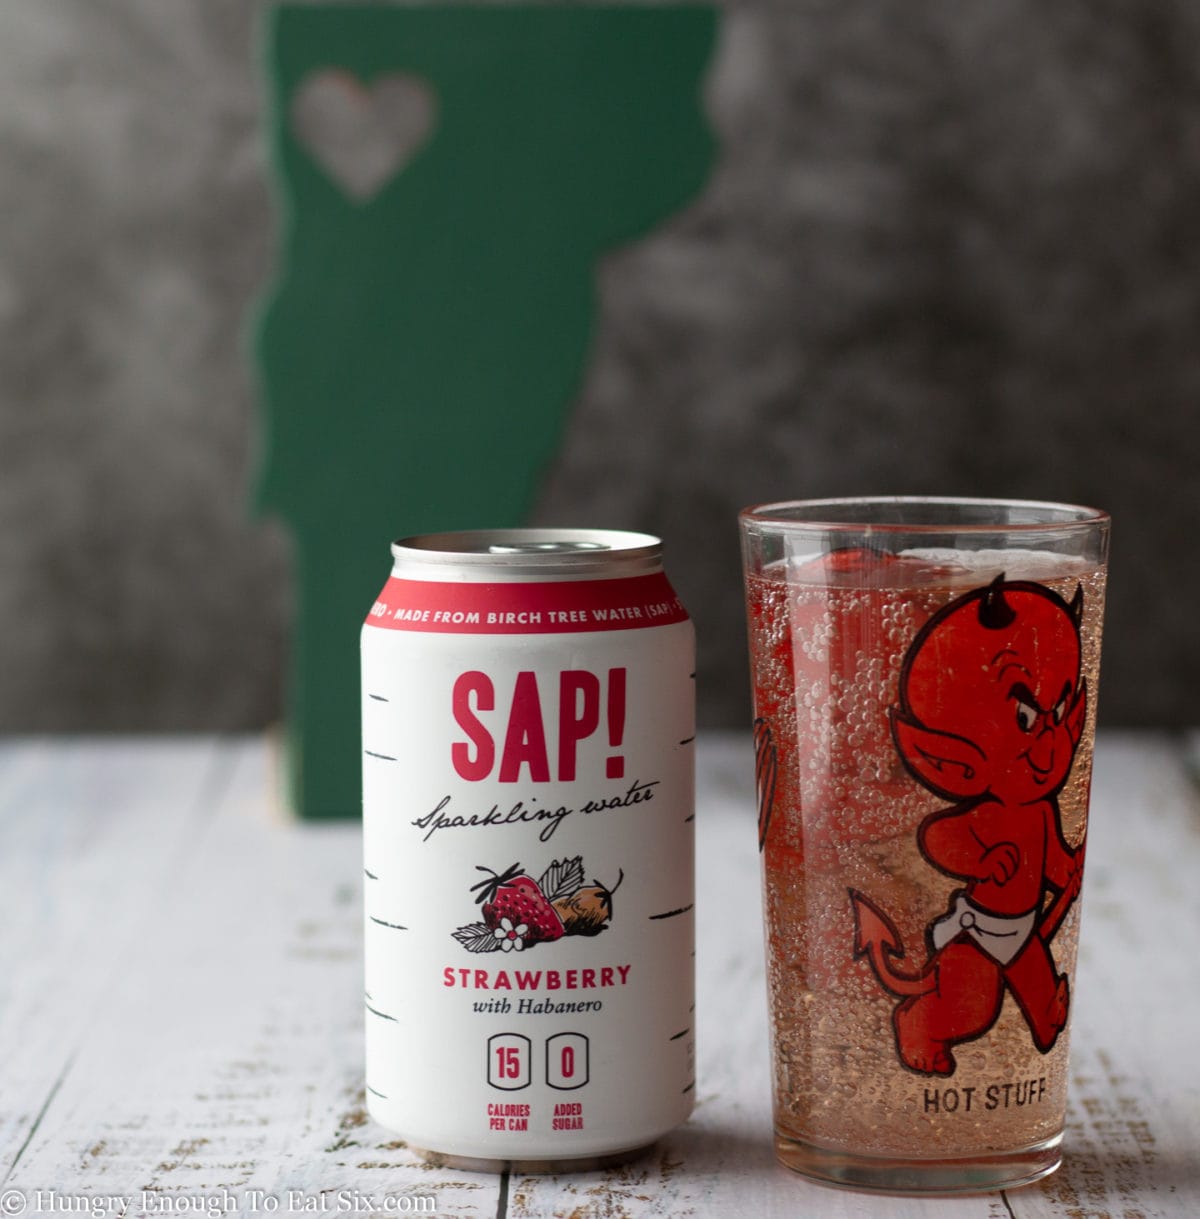 Can of Sap! beverage next to a glass of pinkish sparkling water.